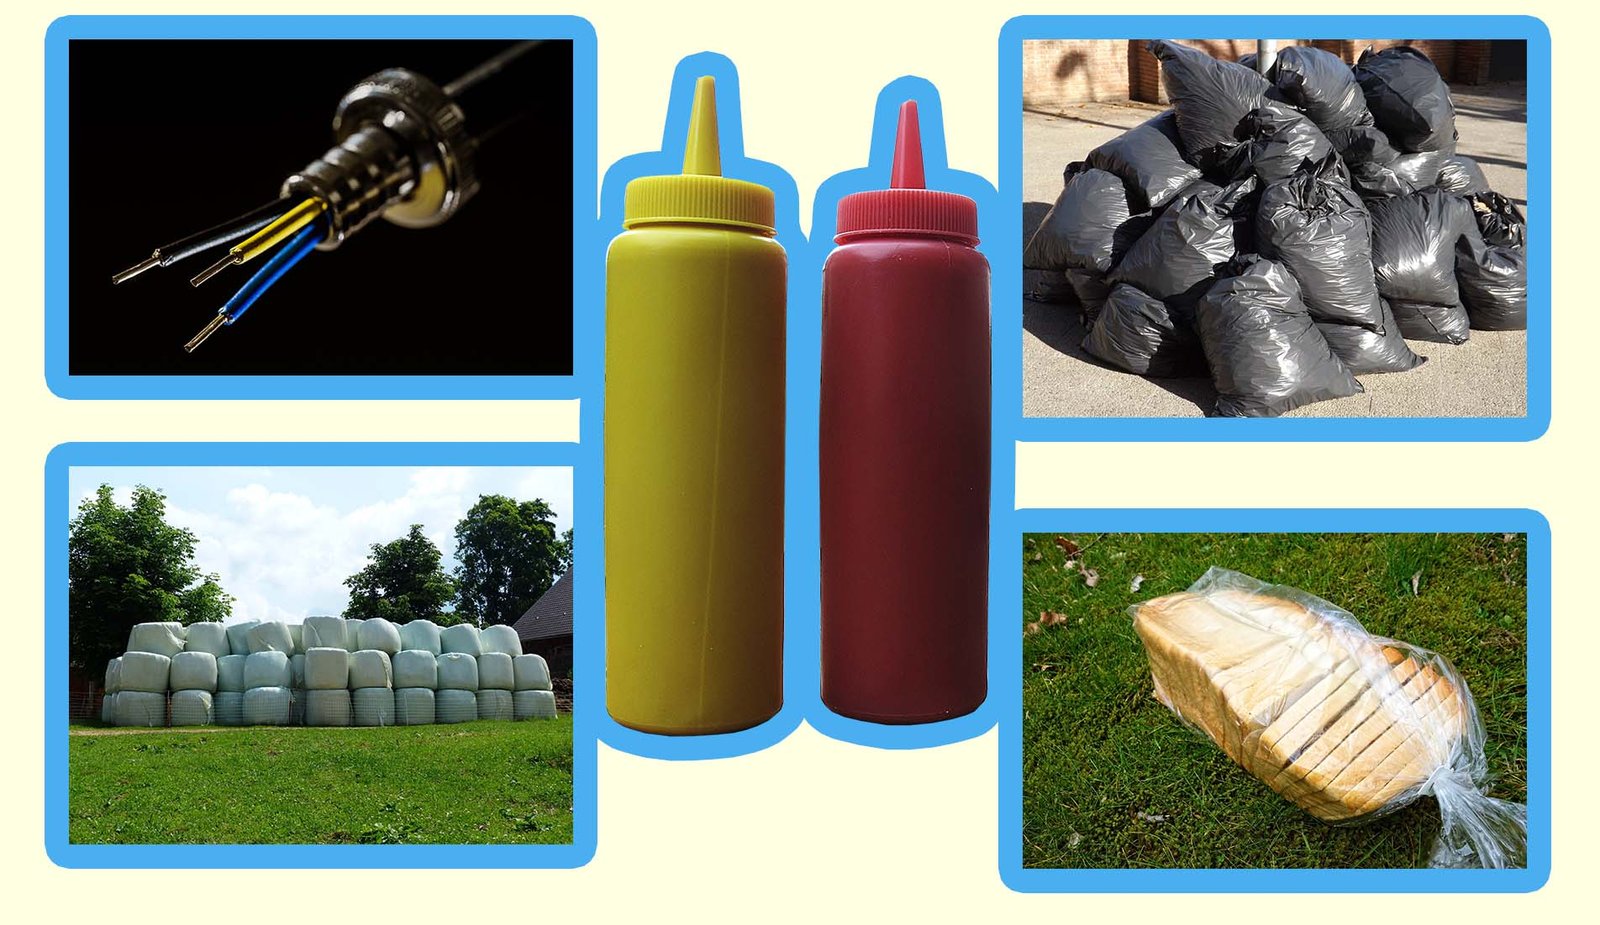 A montage to show the uses of LDPE.